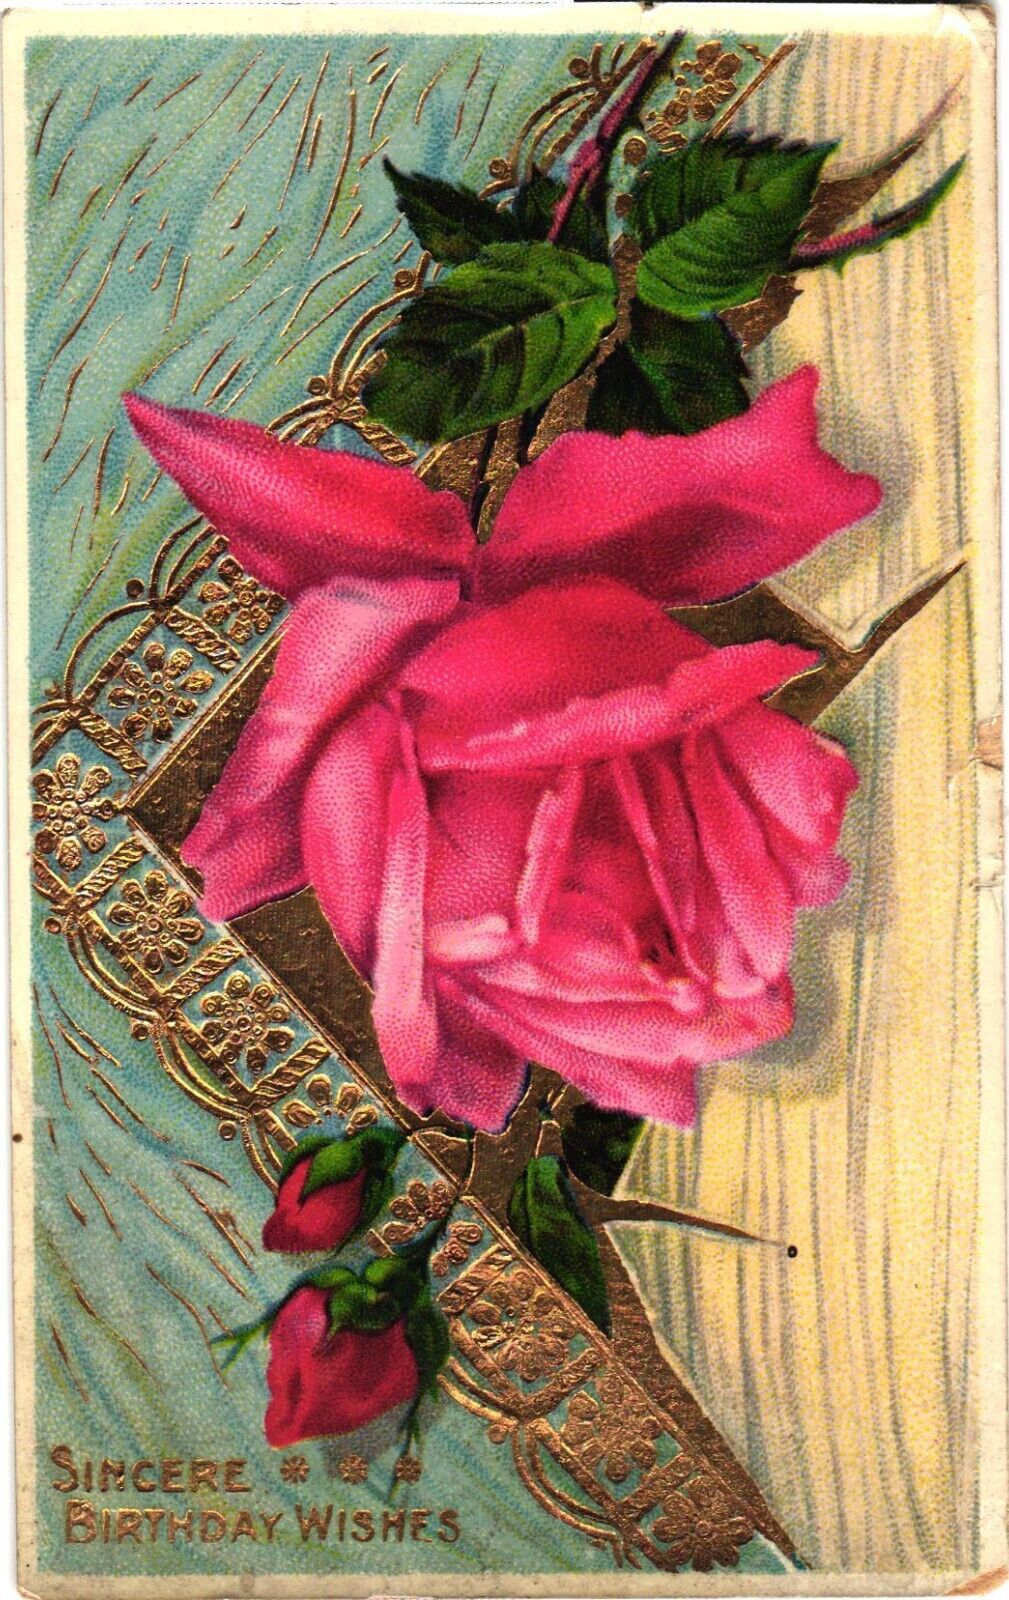 Beautiful Pink Roses, Sincere Birthday Wishes Postcard